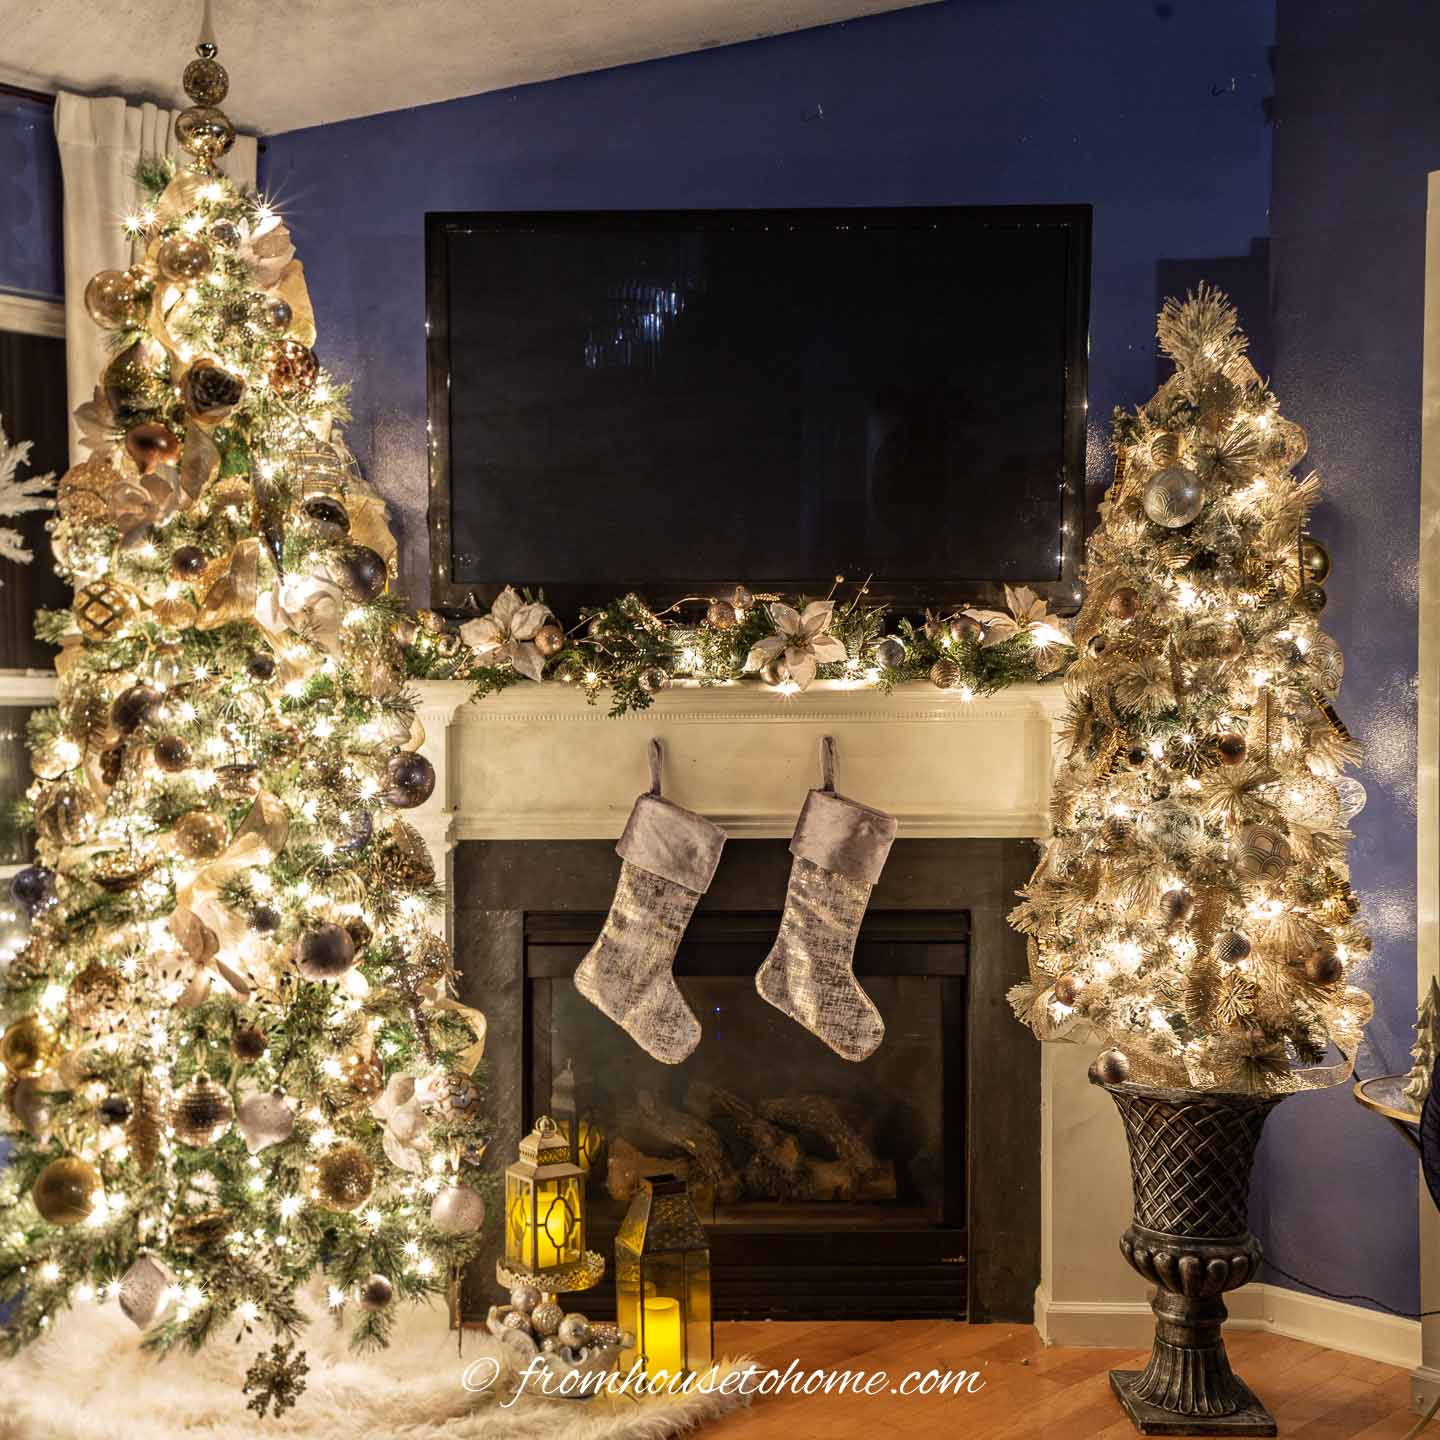 Two Christmas trees on either side of the fireplace, all decorate with gold, silver and copper ornaments